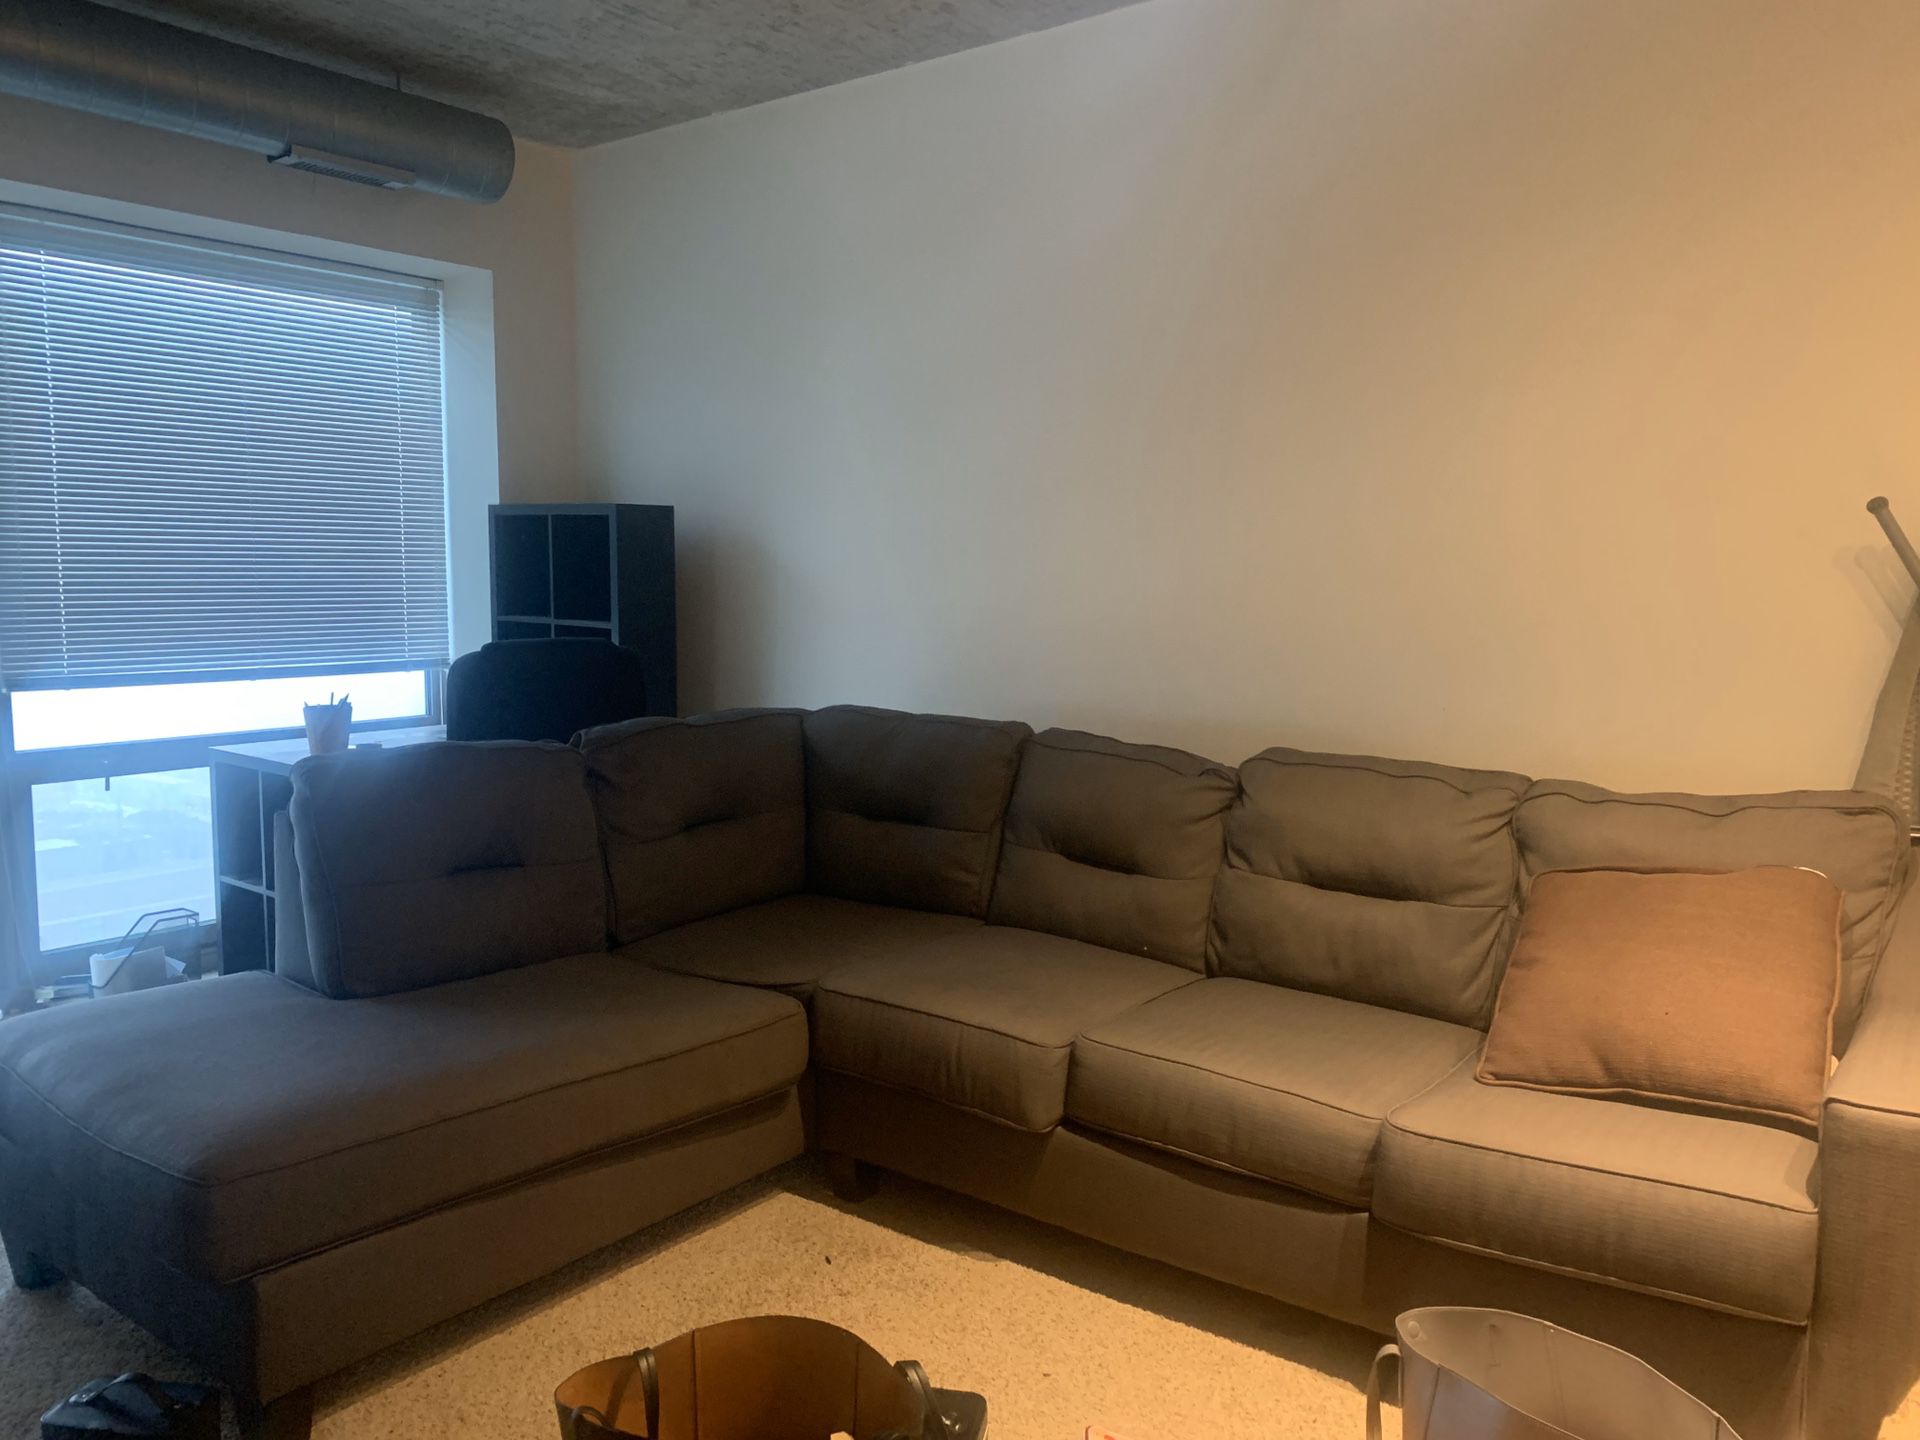 Benchcraft sectional couch for sell!